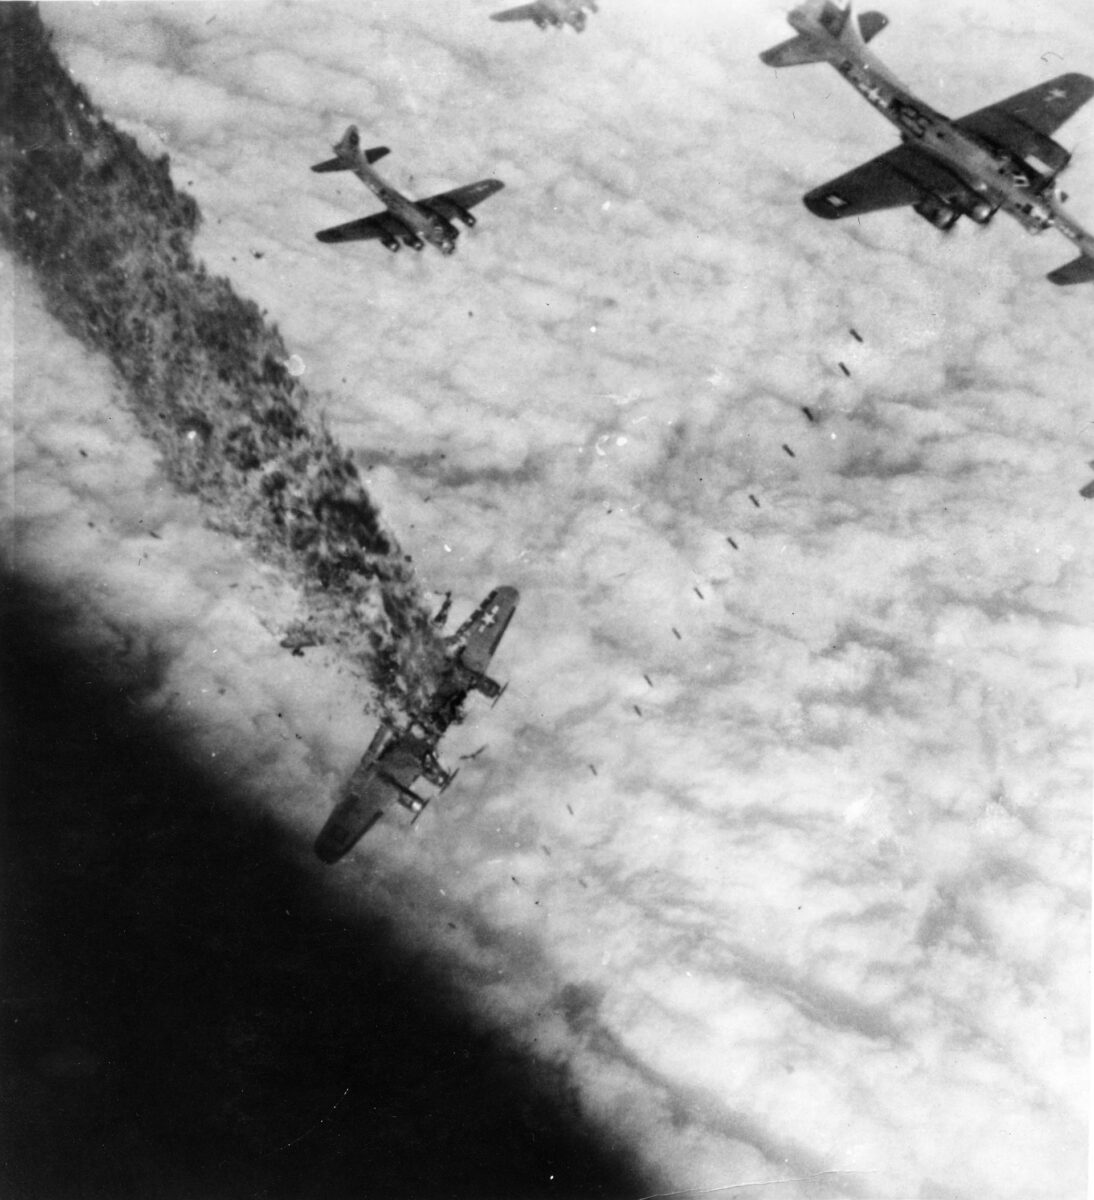 A B-17 (right) of the 486th Bomb Group drops its bombs over a synthetic oil plant at Merseburg, November 2, 1944, while another plane disintegrates in flames, a victim of flak. 